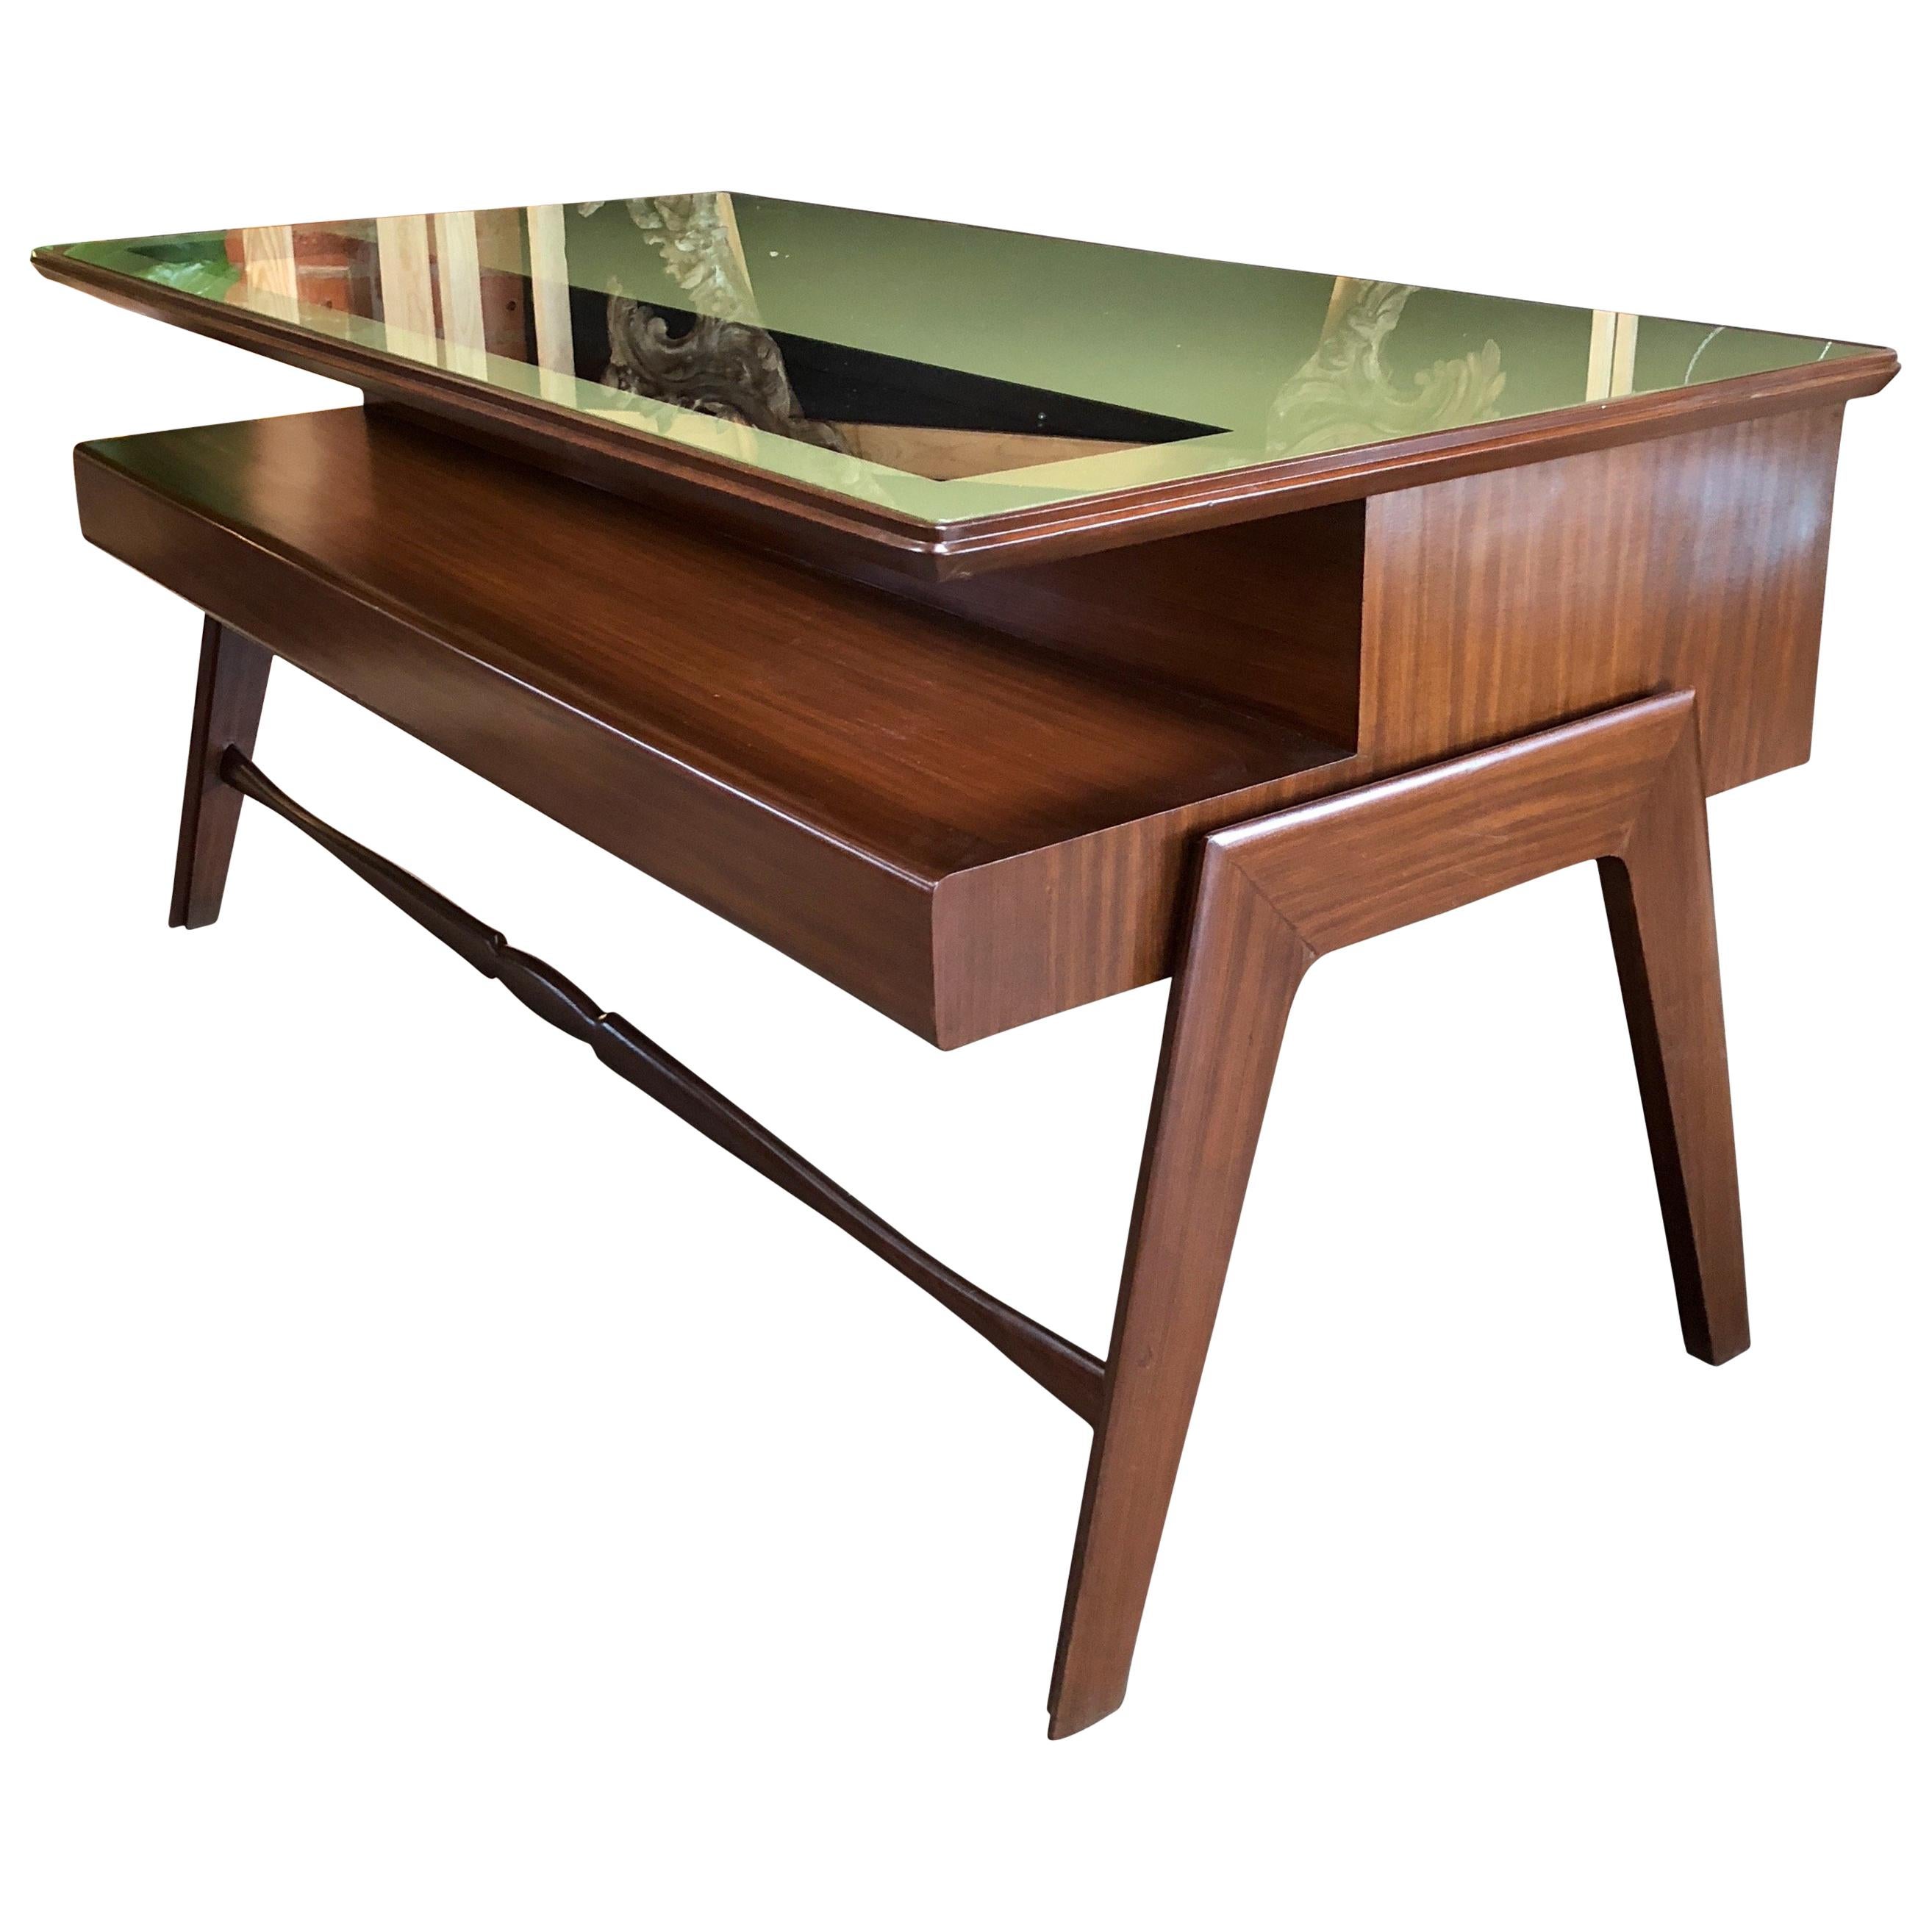 Rare Italian Executive Desk with Floating Glass Top by Vittorio Dassi, 1950s